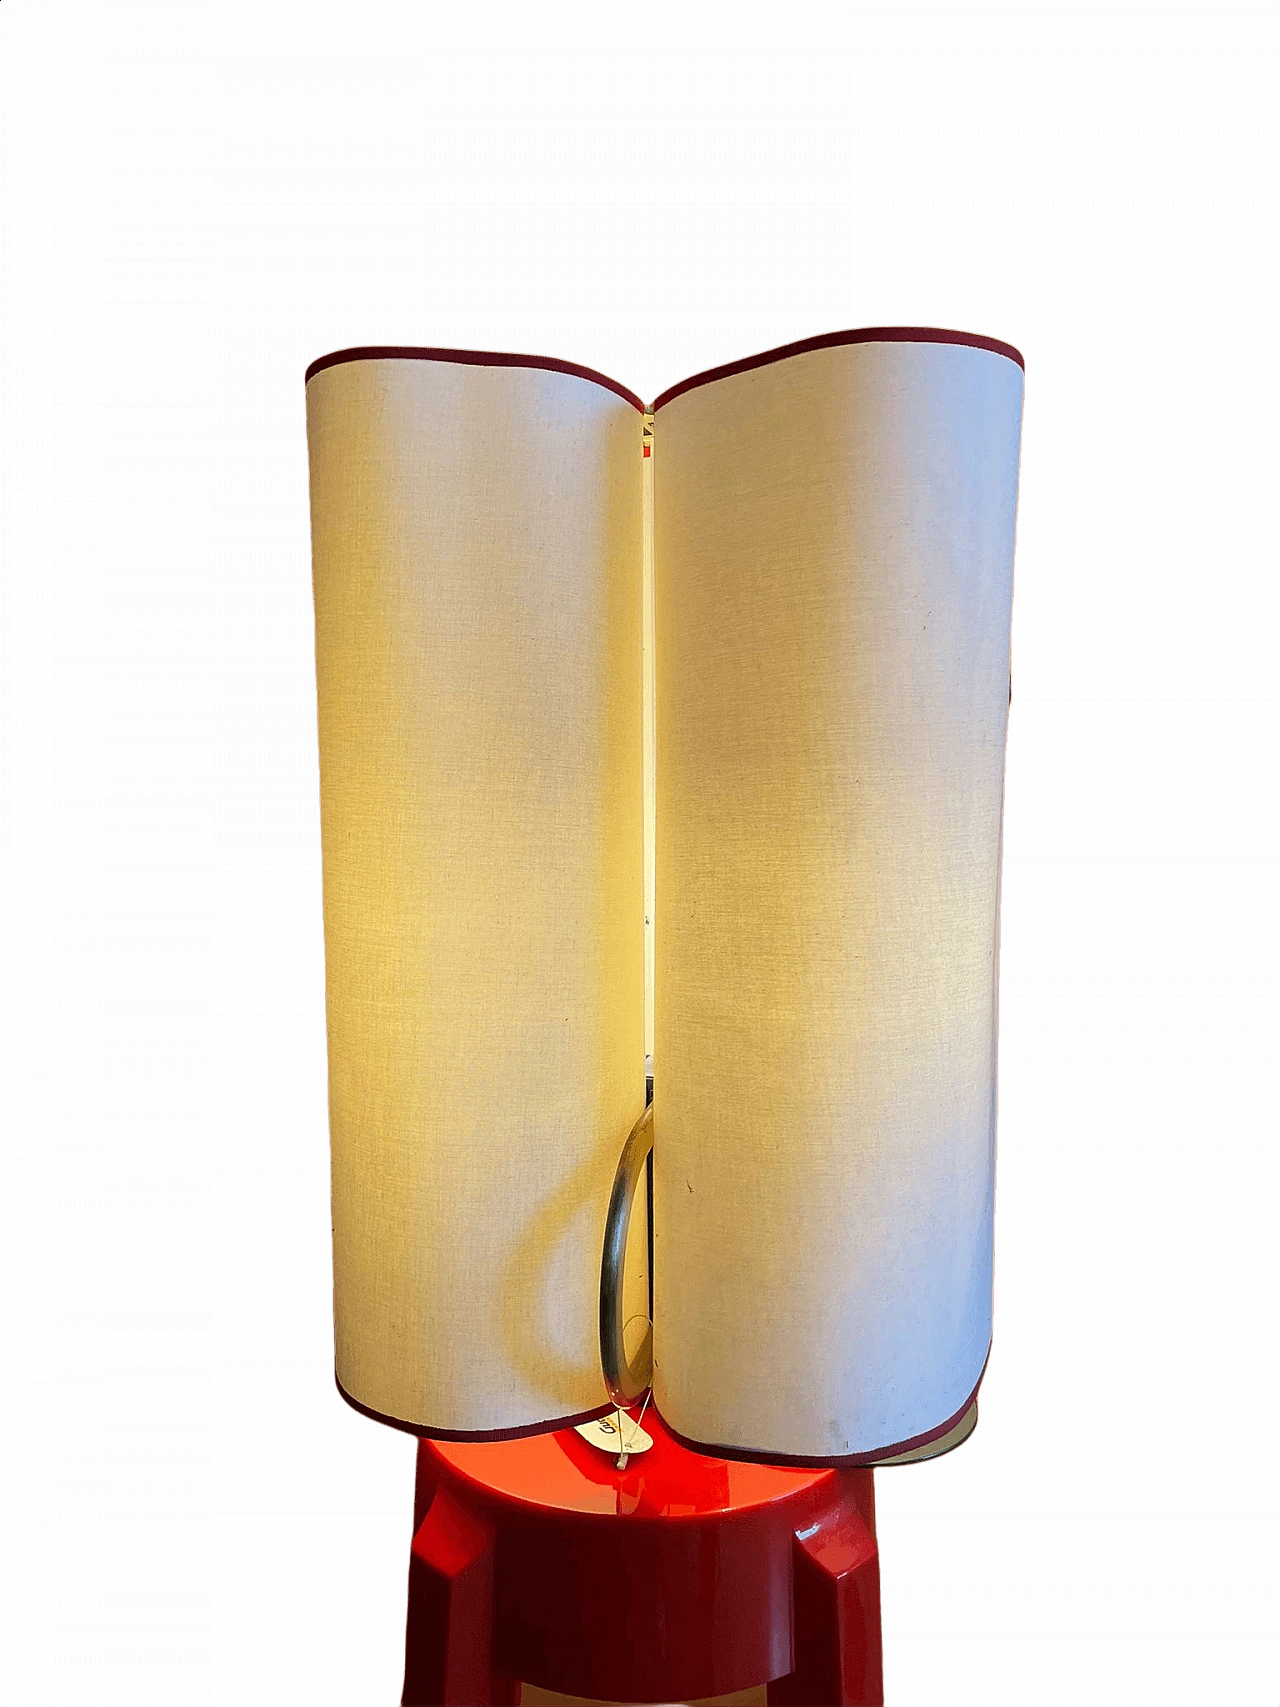 Abatina table lamp by Tobia Scarpa for Flos, 1980s 1353911